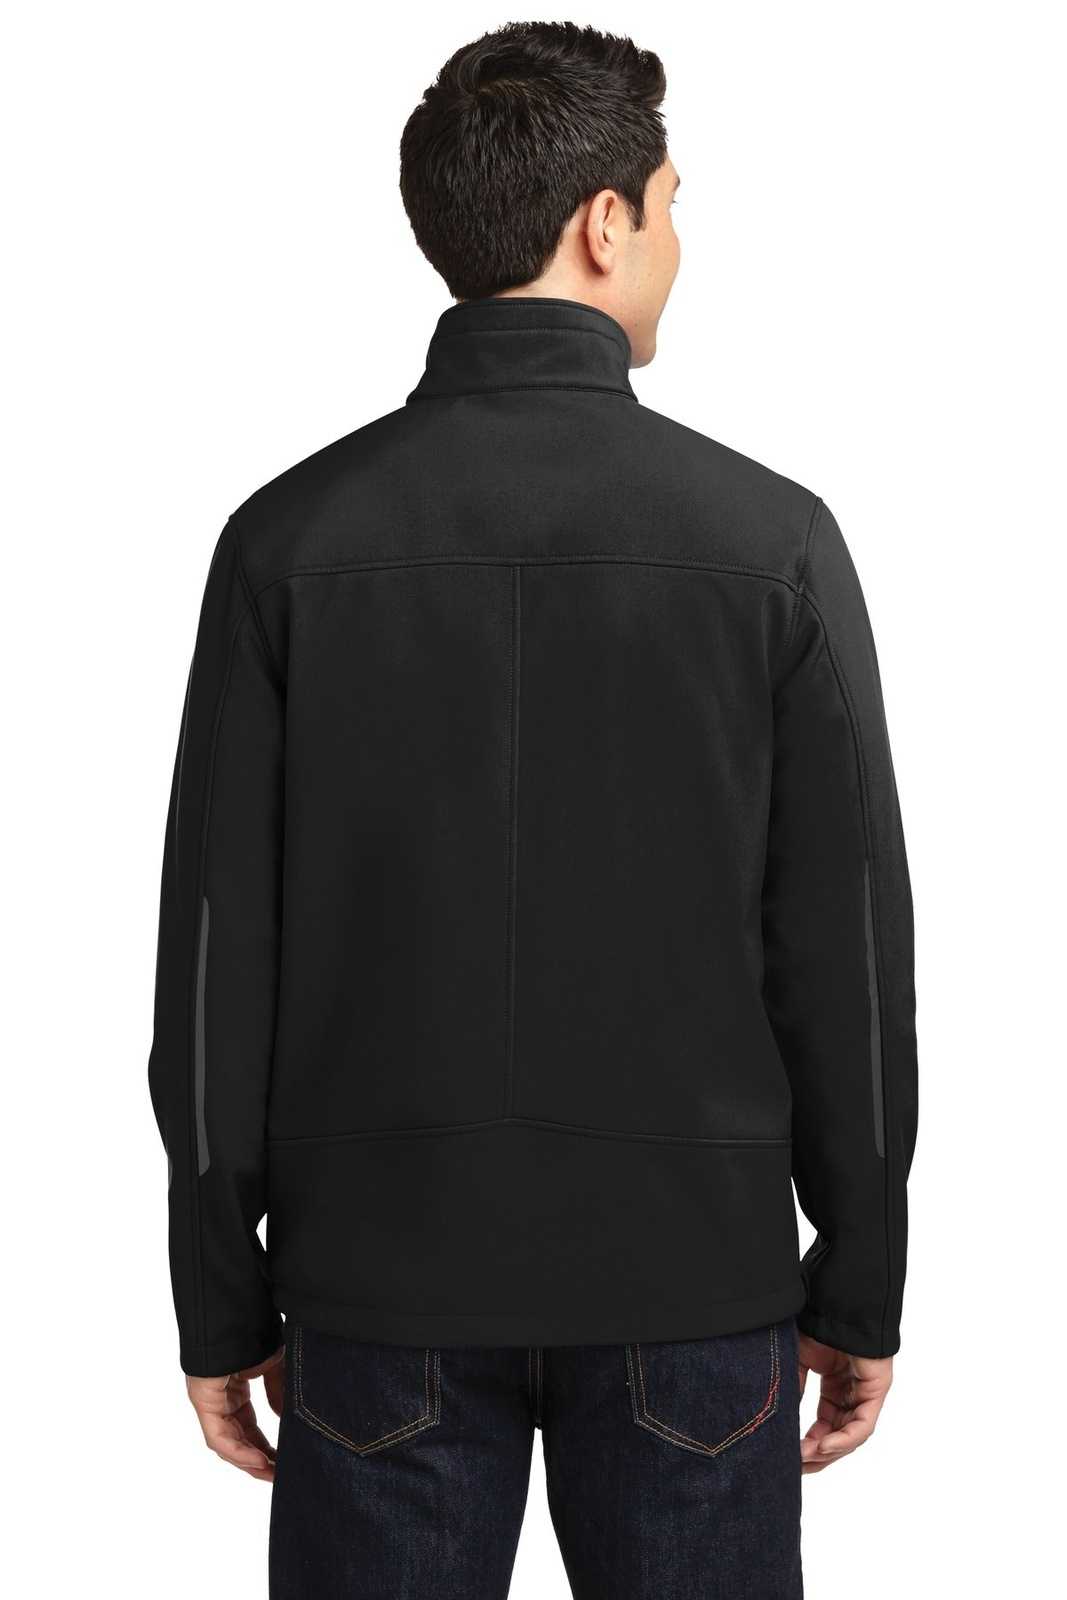 Port Authority J324 Welded Soft Shell Jacket - Black - HIT a Double - 1